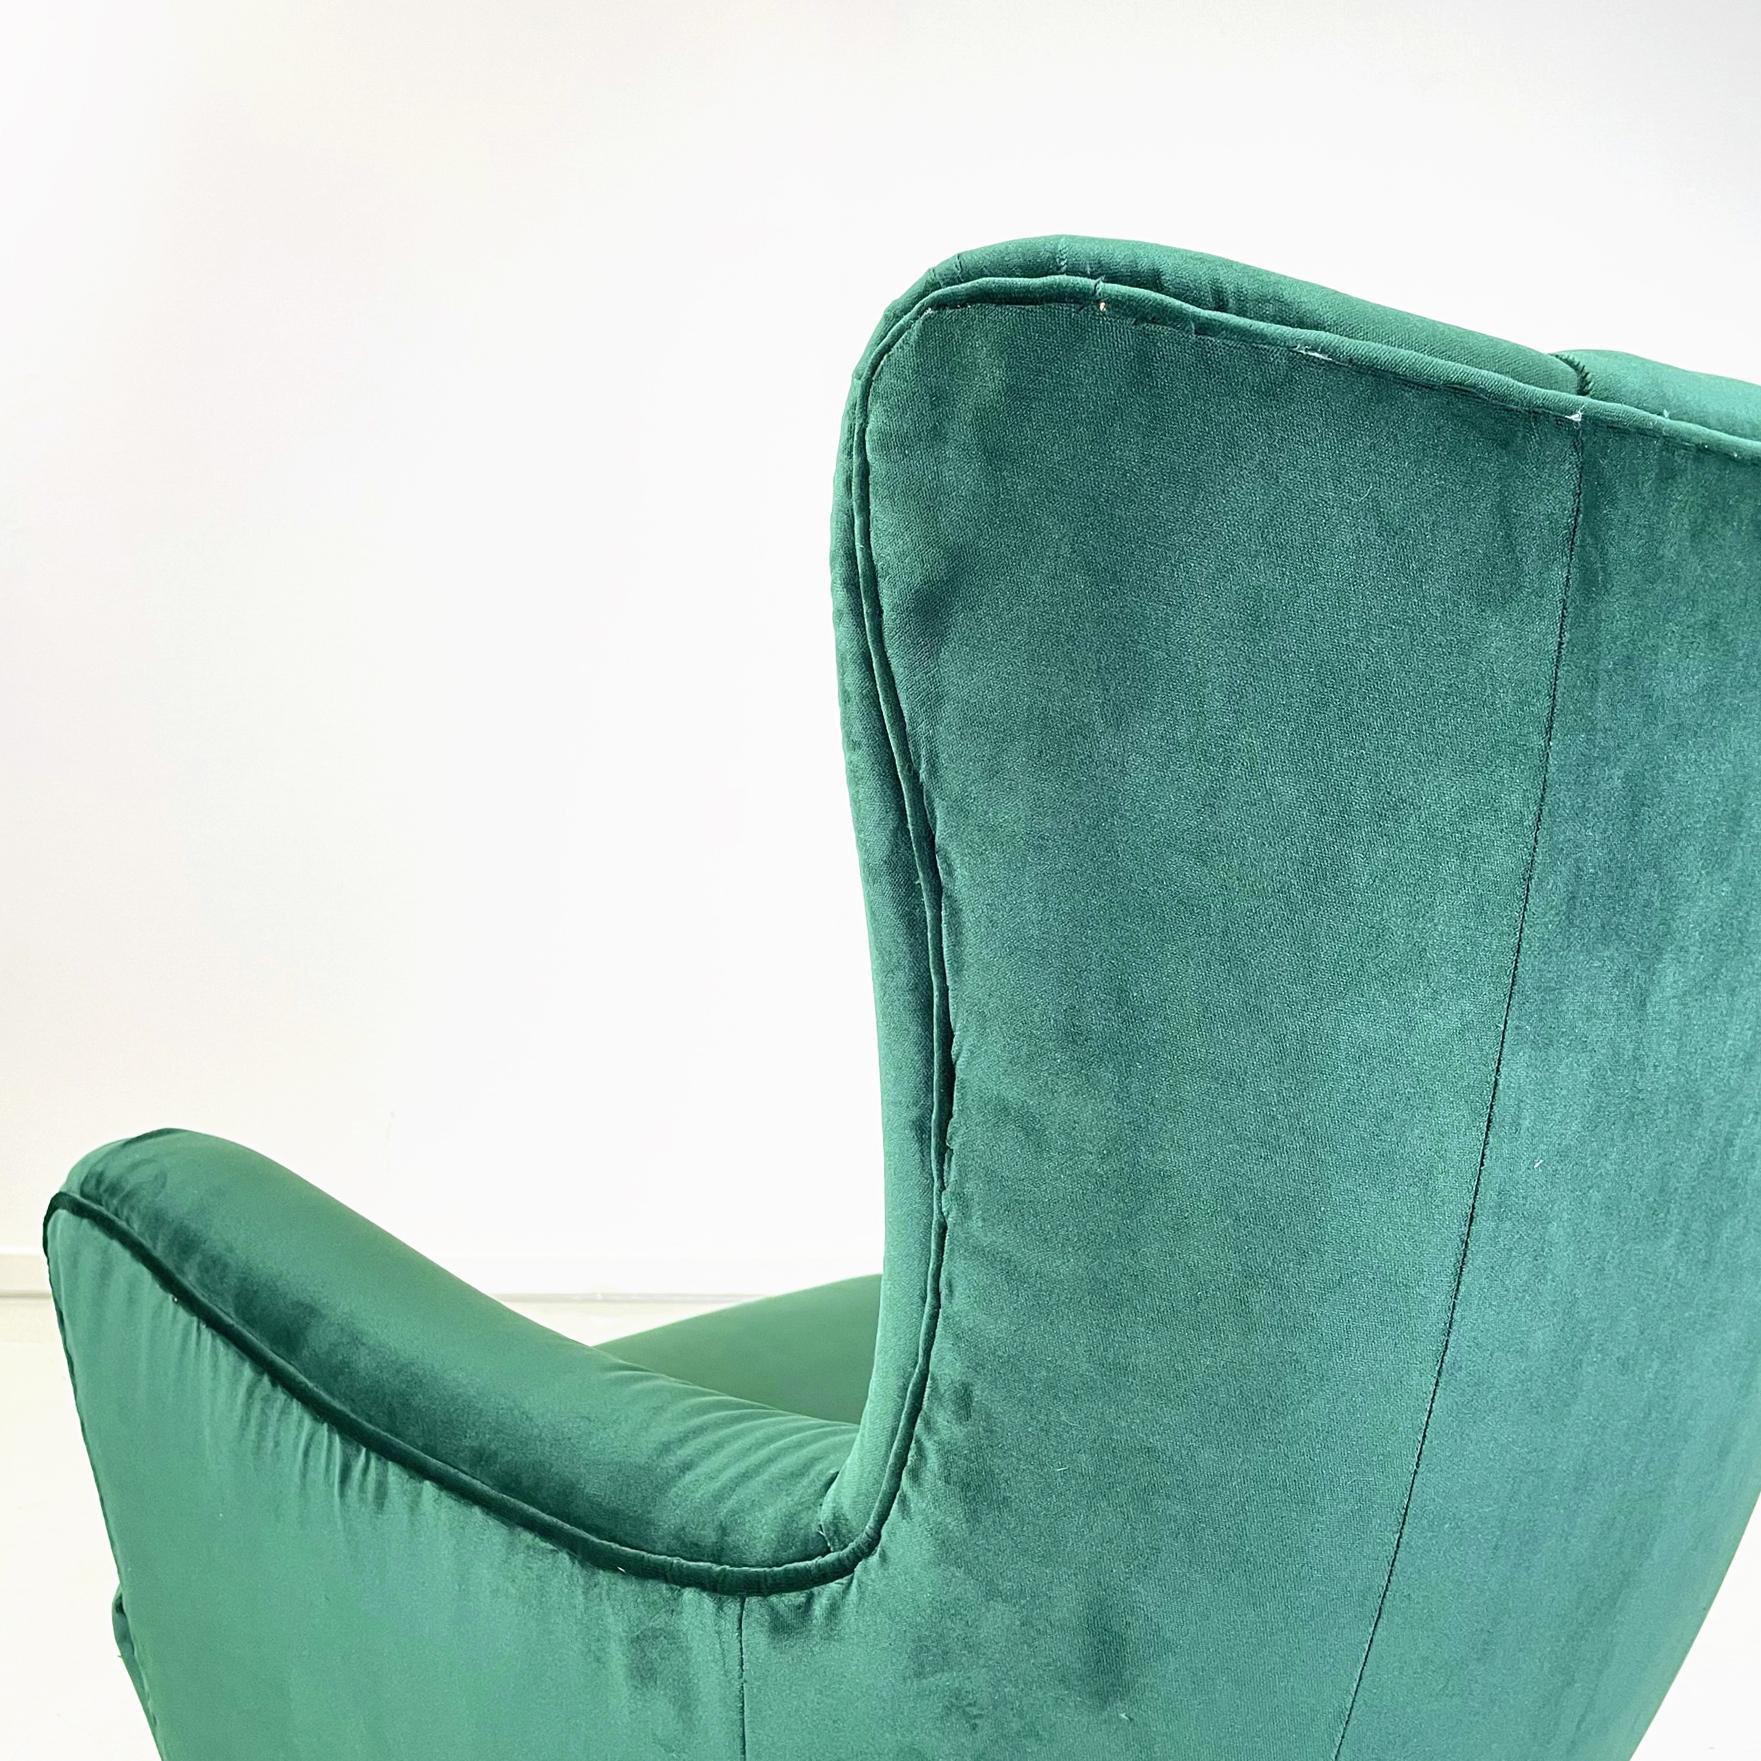 Italian Mid-Century Armchairs in Forest Green Velvet and Wooden Legs, 1950s For Sale 4